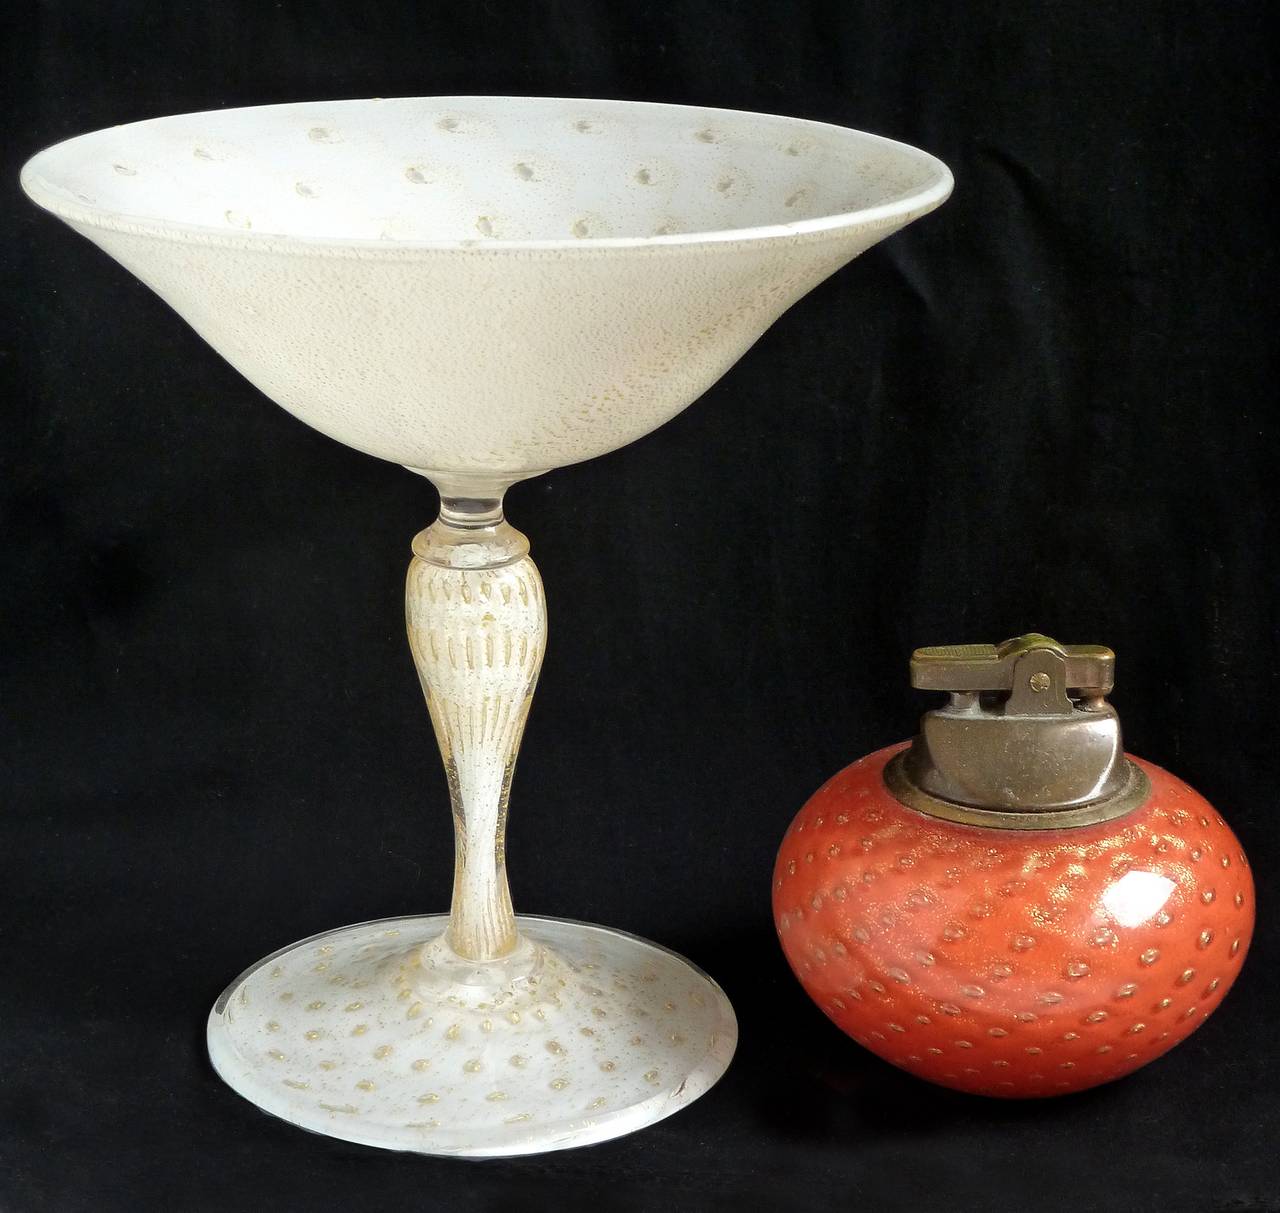 Gorgeous Murano handblown white, controlled bubbles and gold flecks Italian art glass pedestal compote bowl. Documented to designer Alfredo Barbini, circa 1950s. Profusely covered in gold leaf inside and out, and with a martini glass shape. This is